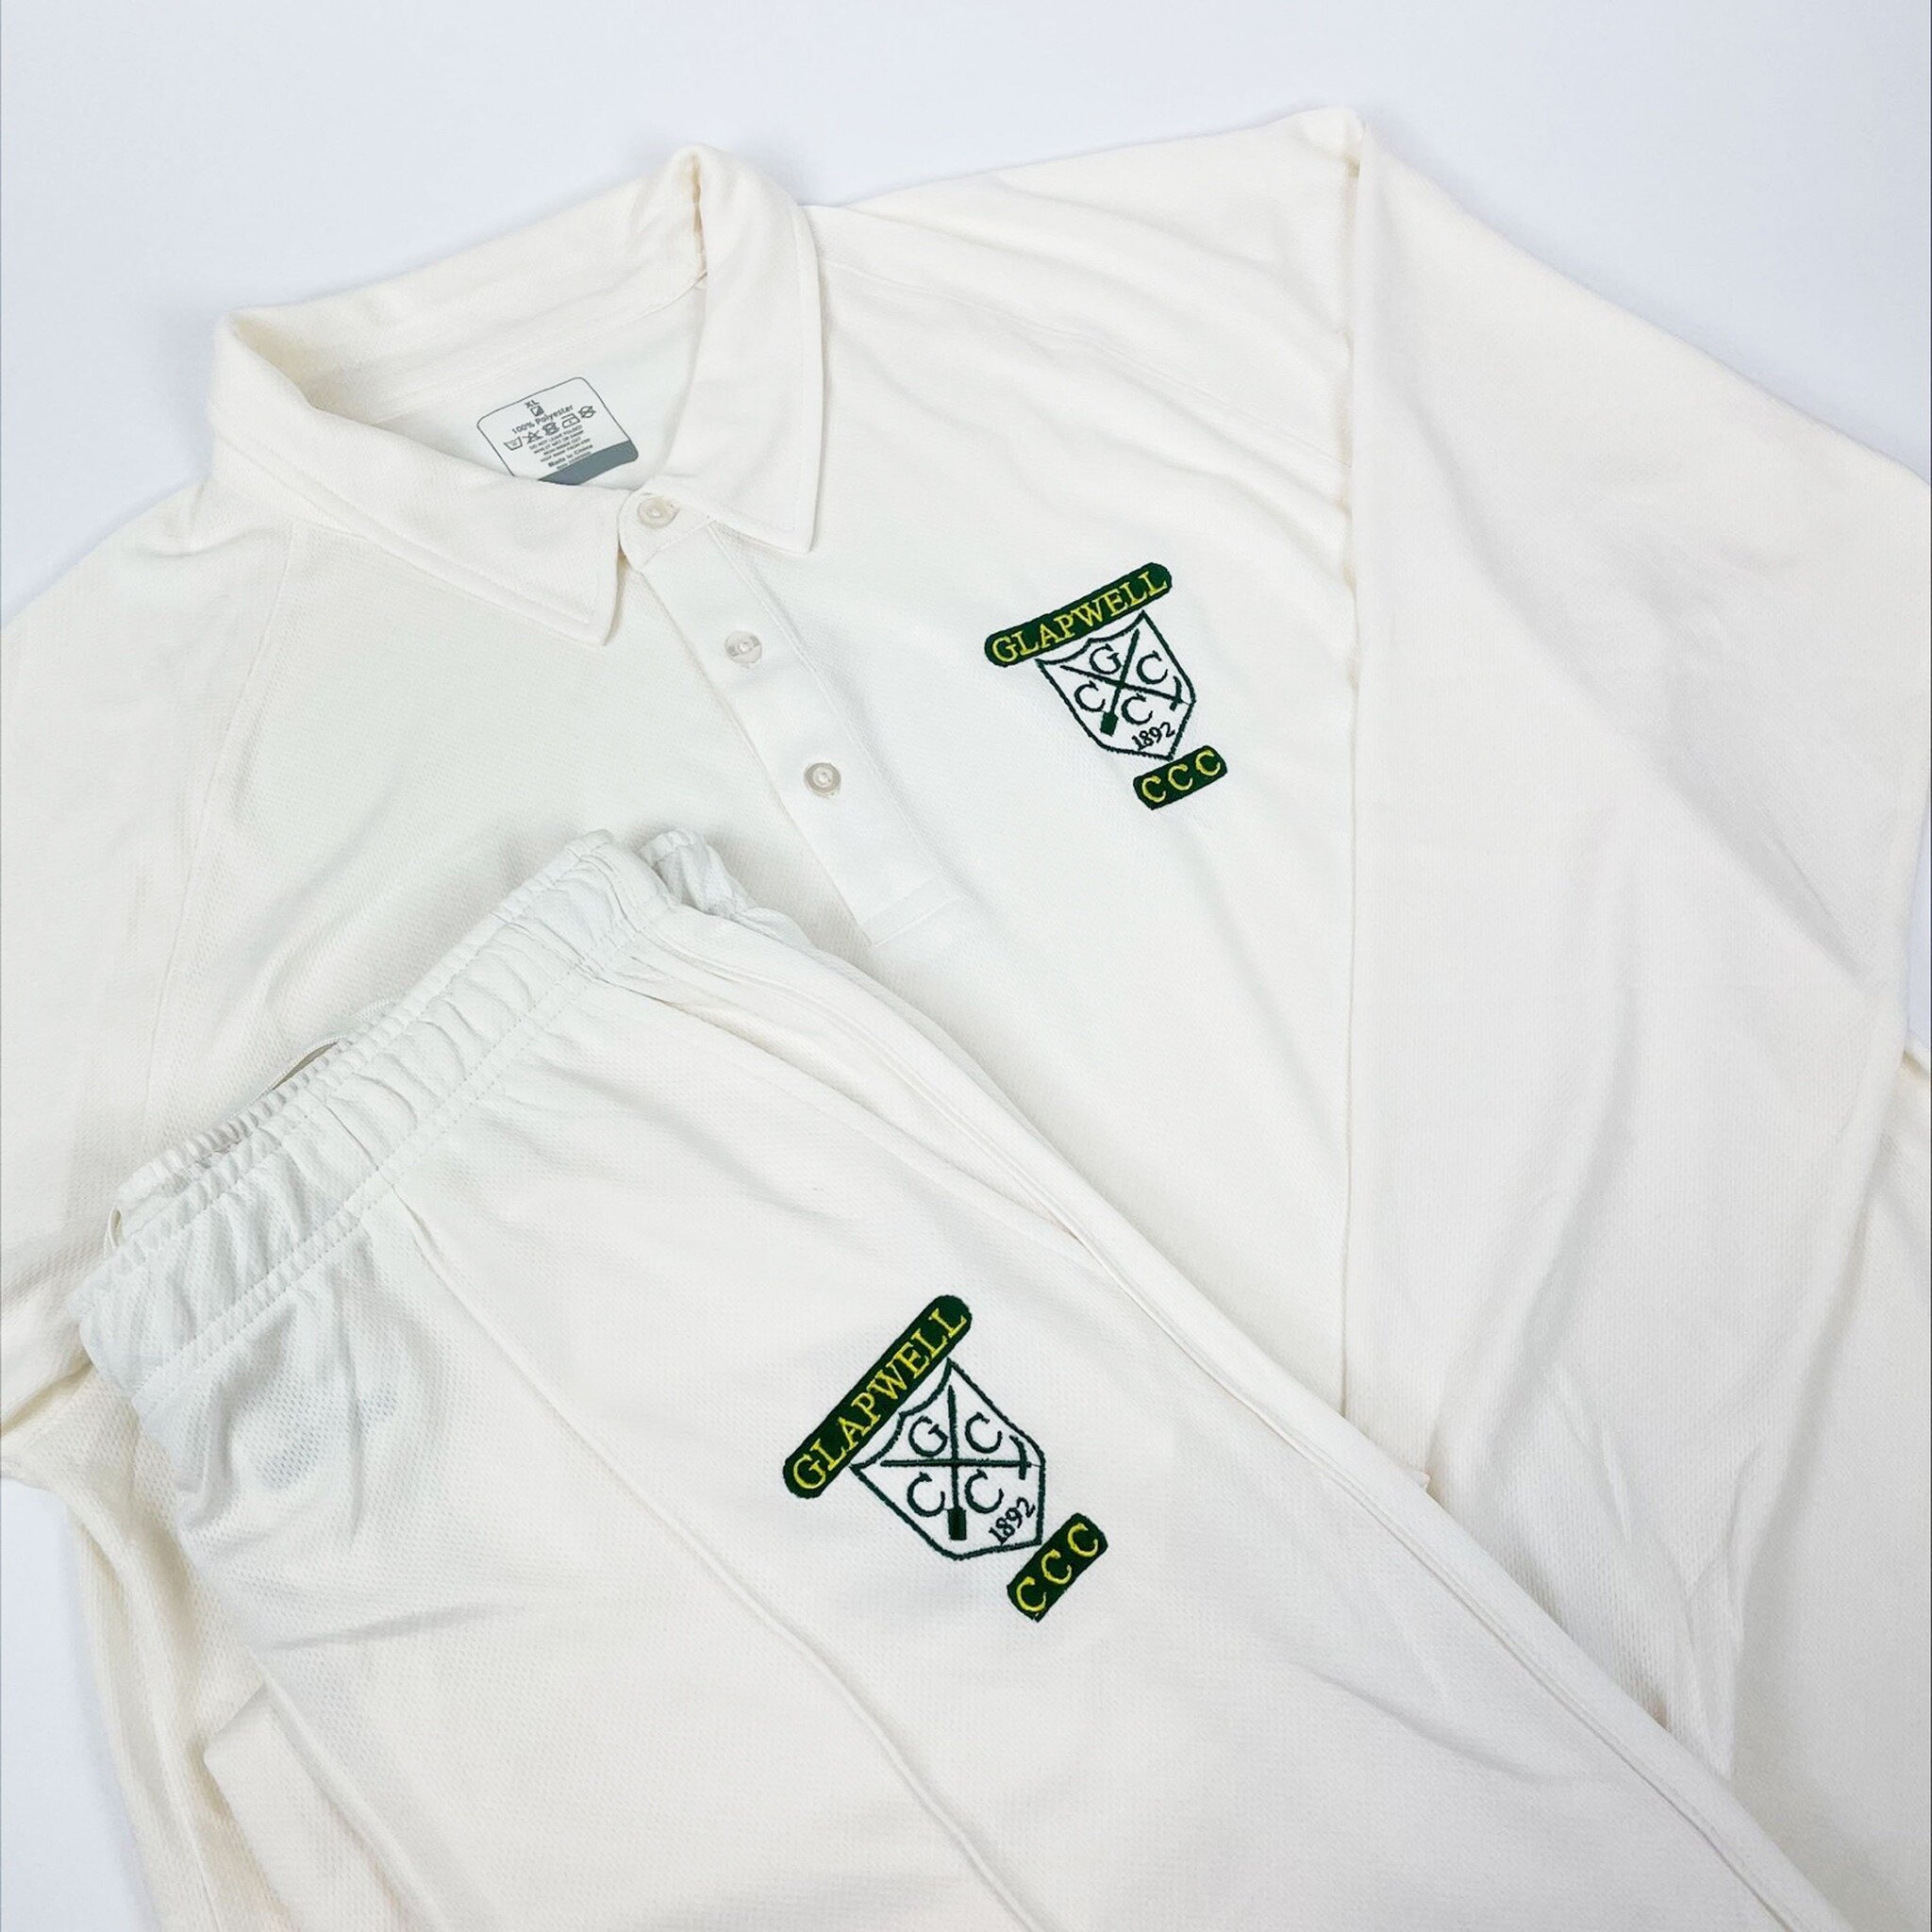 Hope you all had a lovely Bank Holiday weekend! Last week we worked with Glapwell Cricket Club to embroider all of their new Cricket Whites ✨🏏 Contact us today to see what we can do for you 😊
.
.
.
#designandprint #artwork #branding #event #workwea